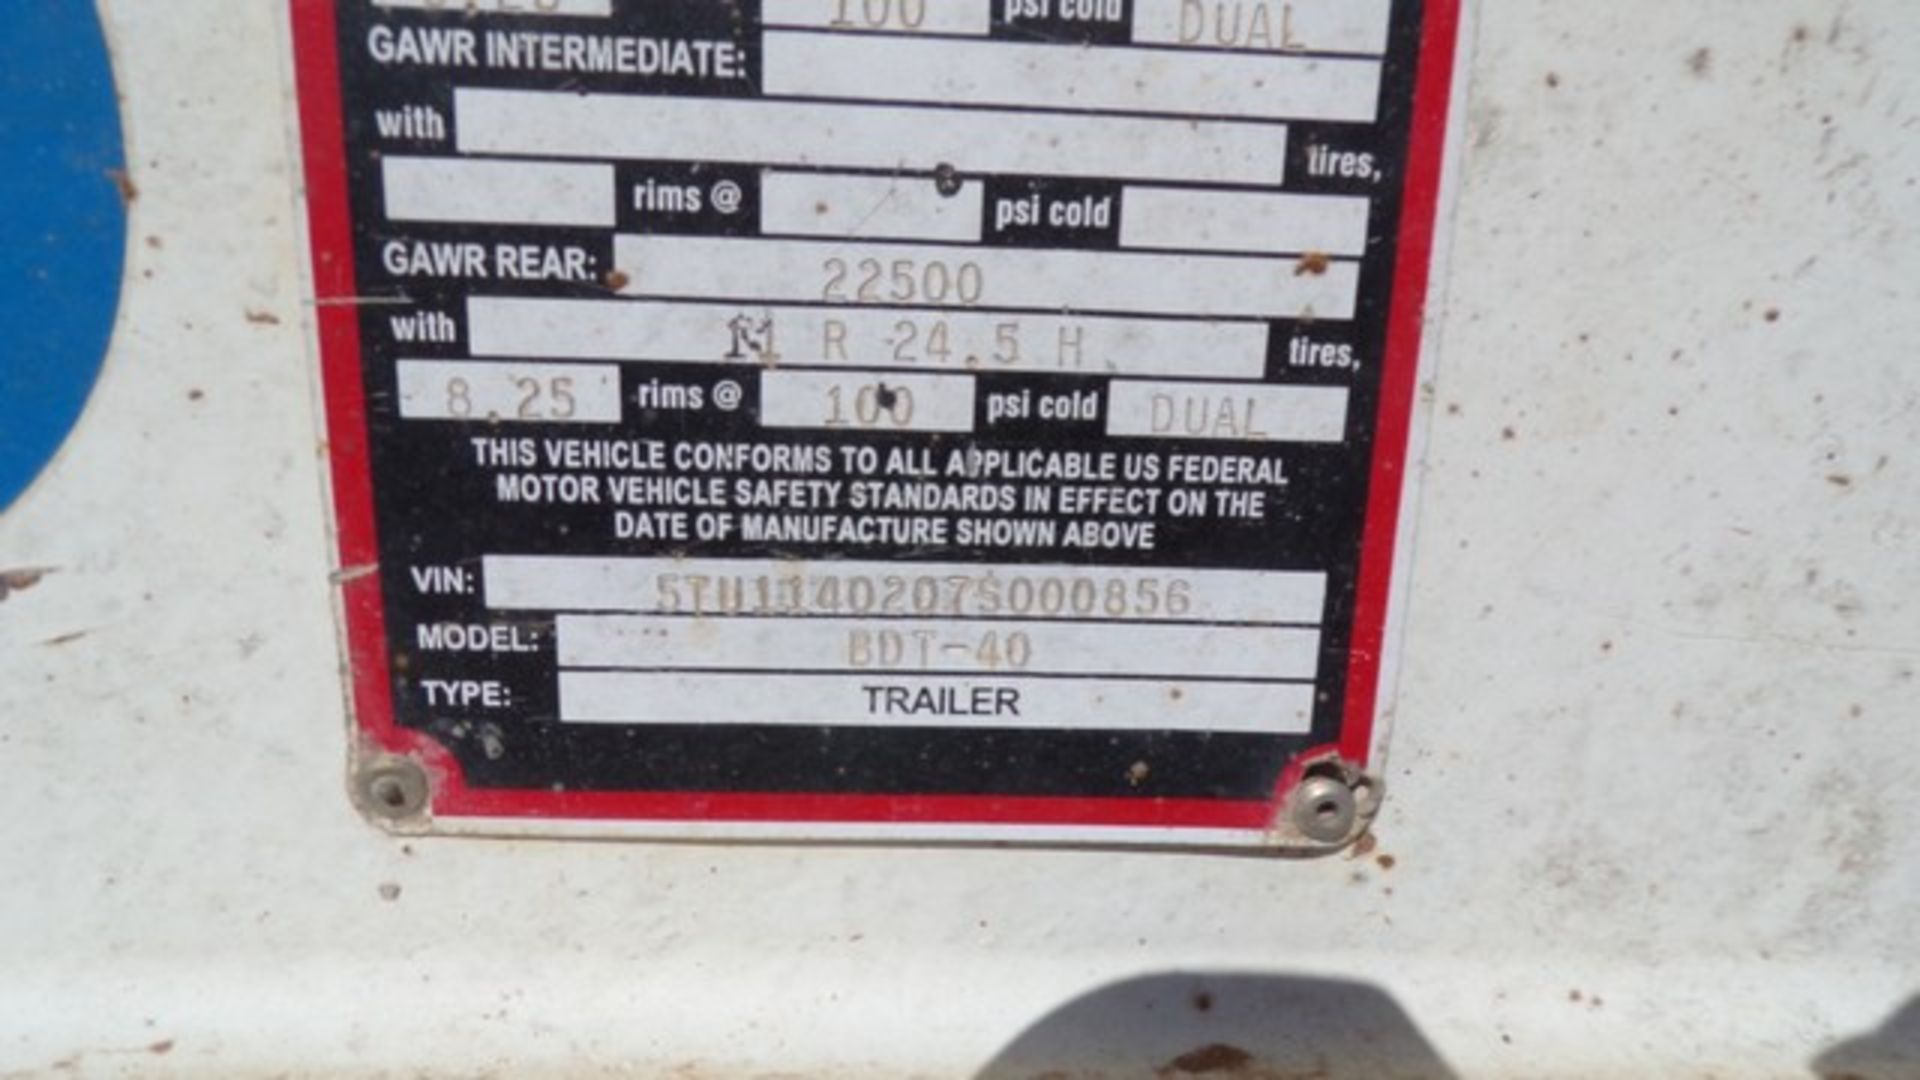 Located in YARD 1 - Midland, TX (2355) (X) 2007 CONSTRUCTION TRAILER SPECIALIST T/A BDT40 BELLY DUMP - Image 3 of 5